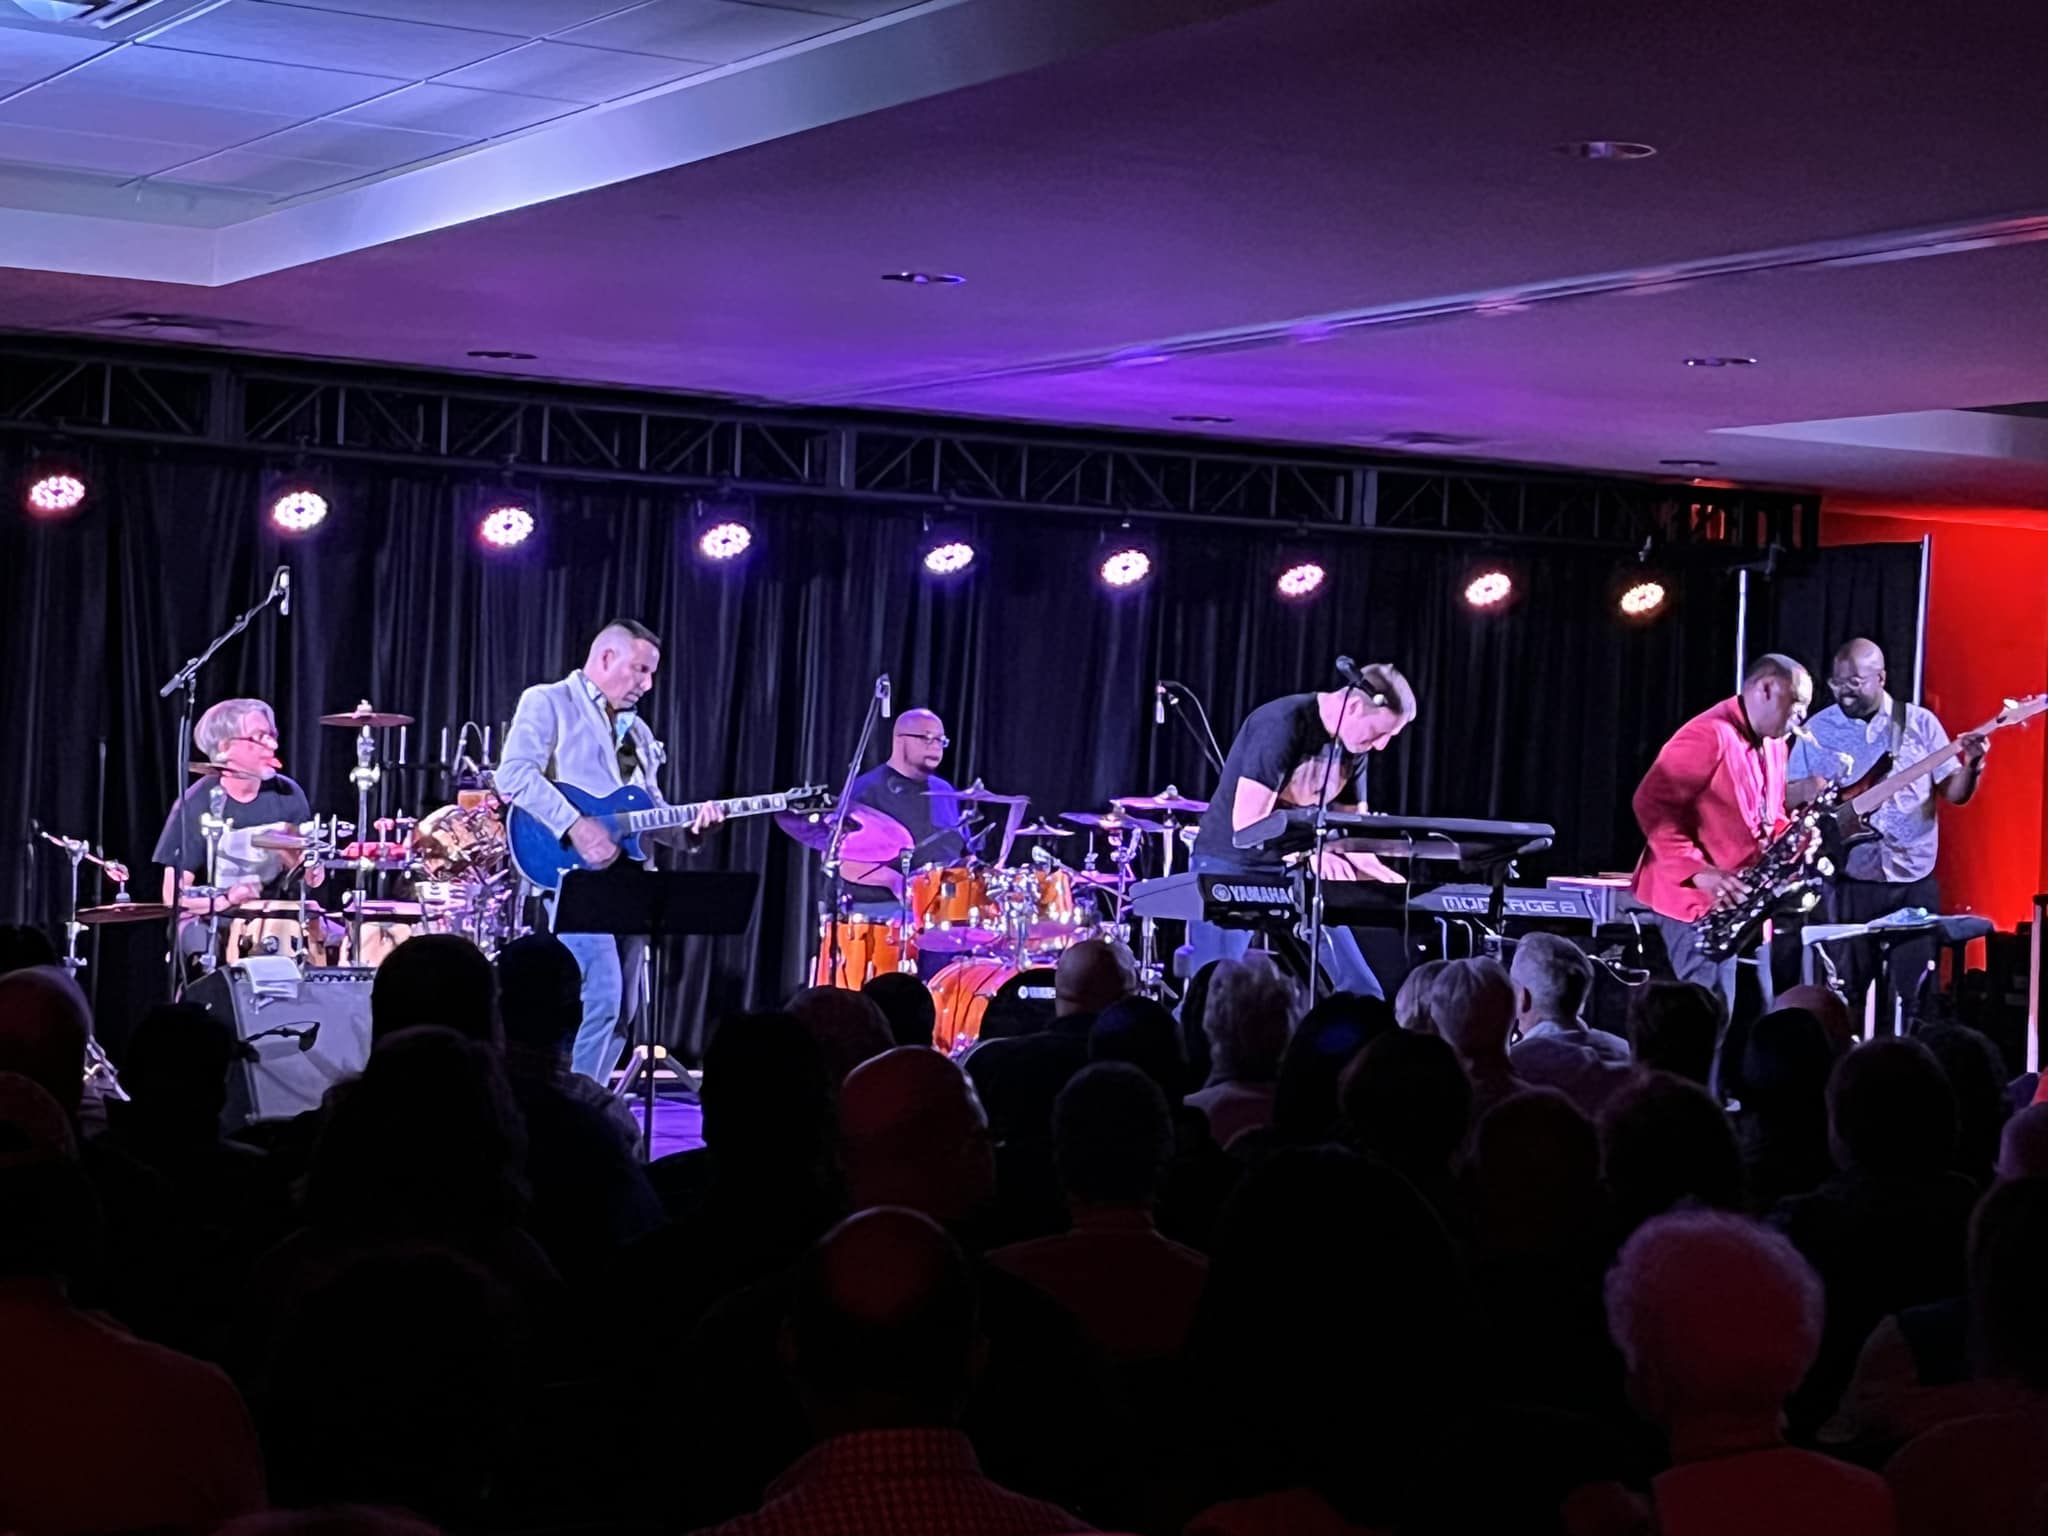 Exhilarating Experience at the 32nd Berks Jazz Festival in Reading, PA